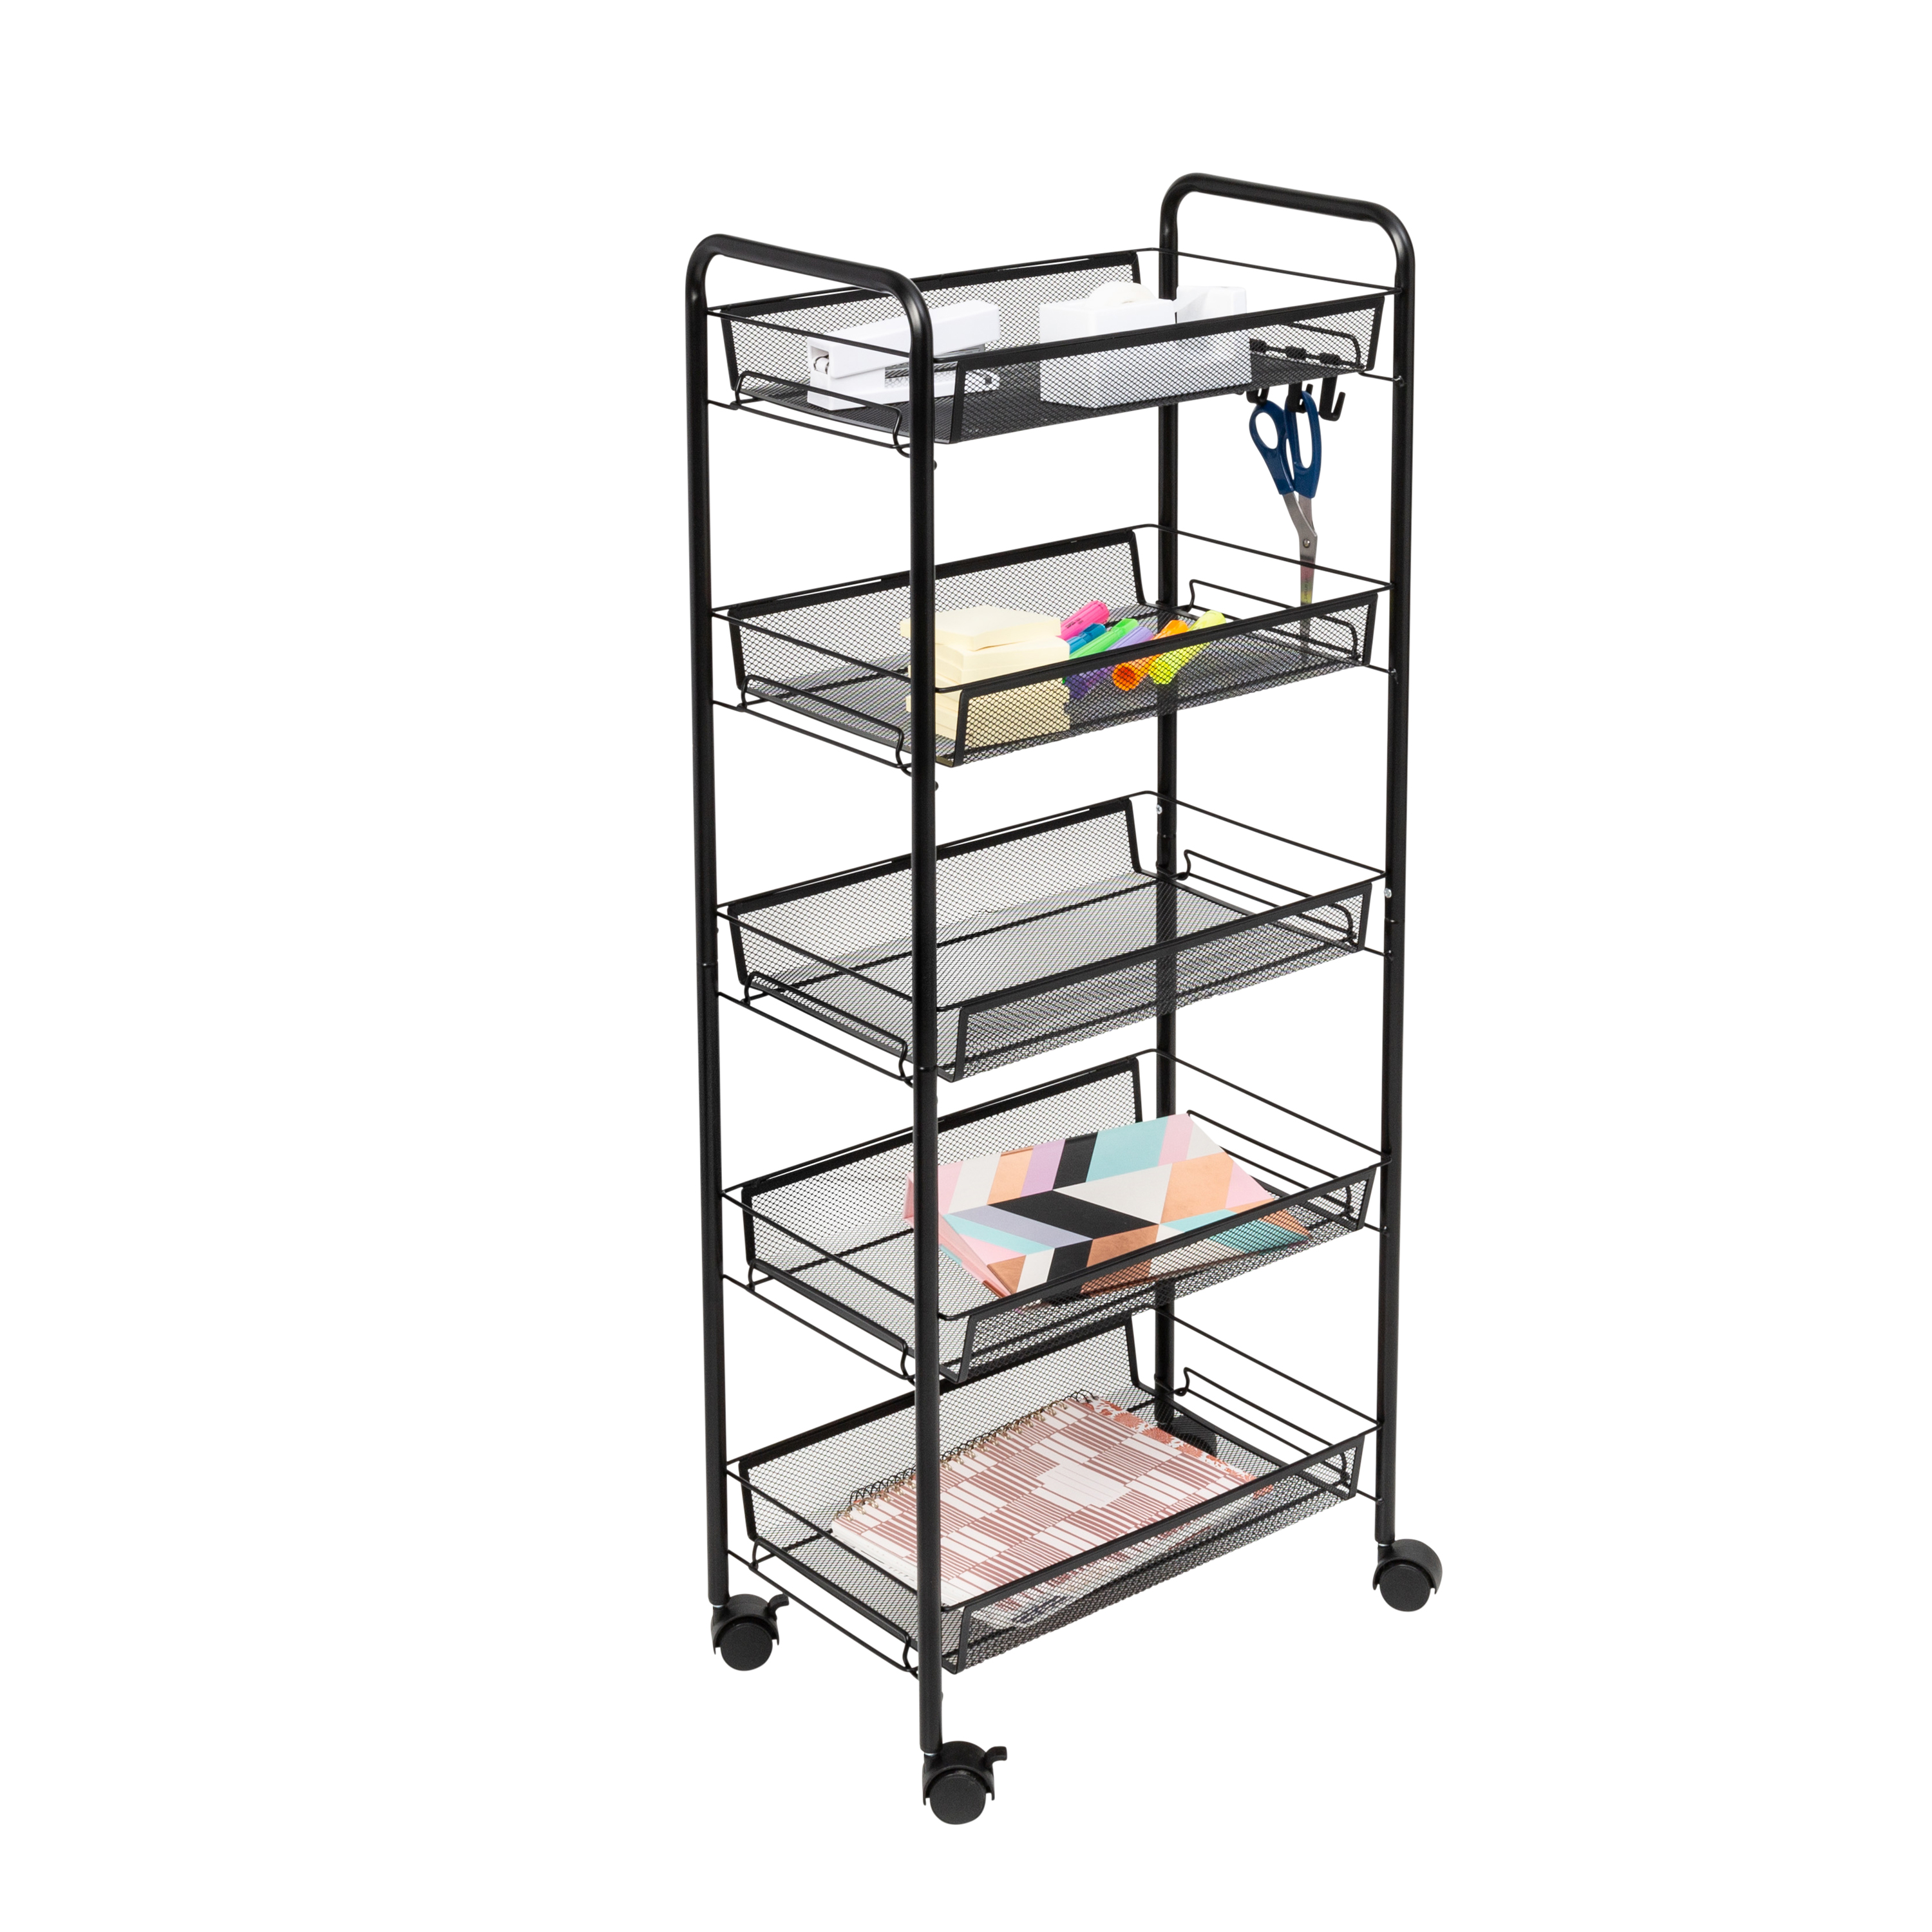 Honey-Can-Do Steel 5-Tier Rolling Storage Cart with 4 Hooks, Black - image 3 of 10